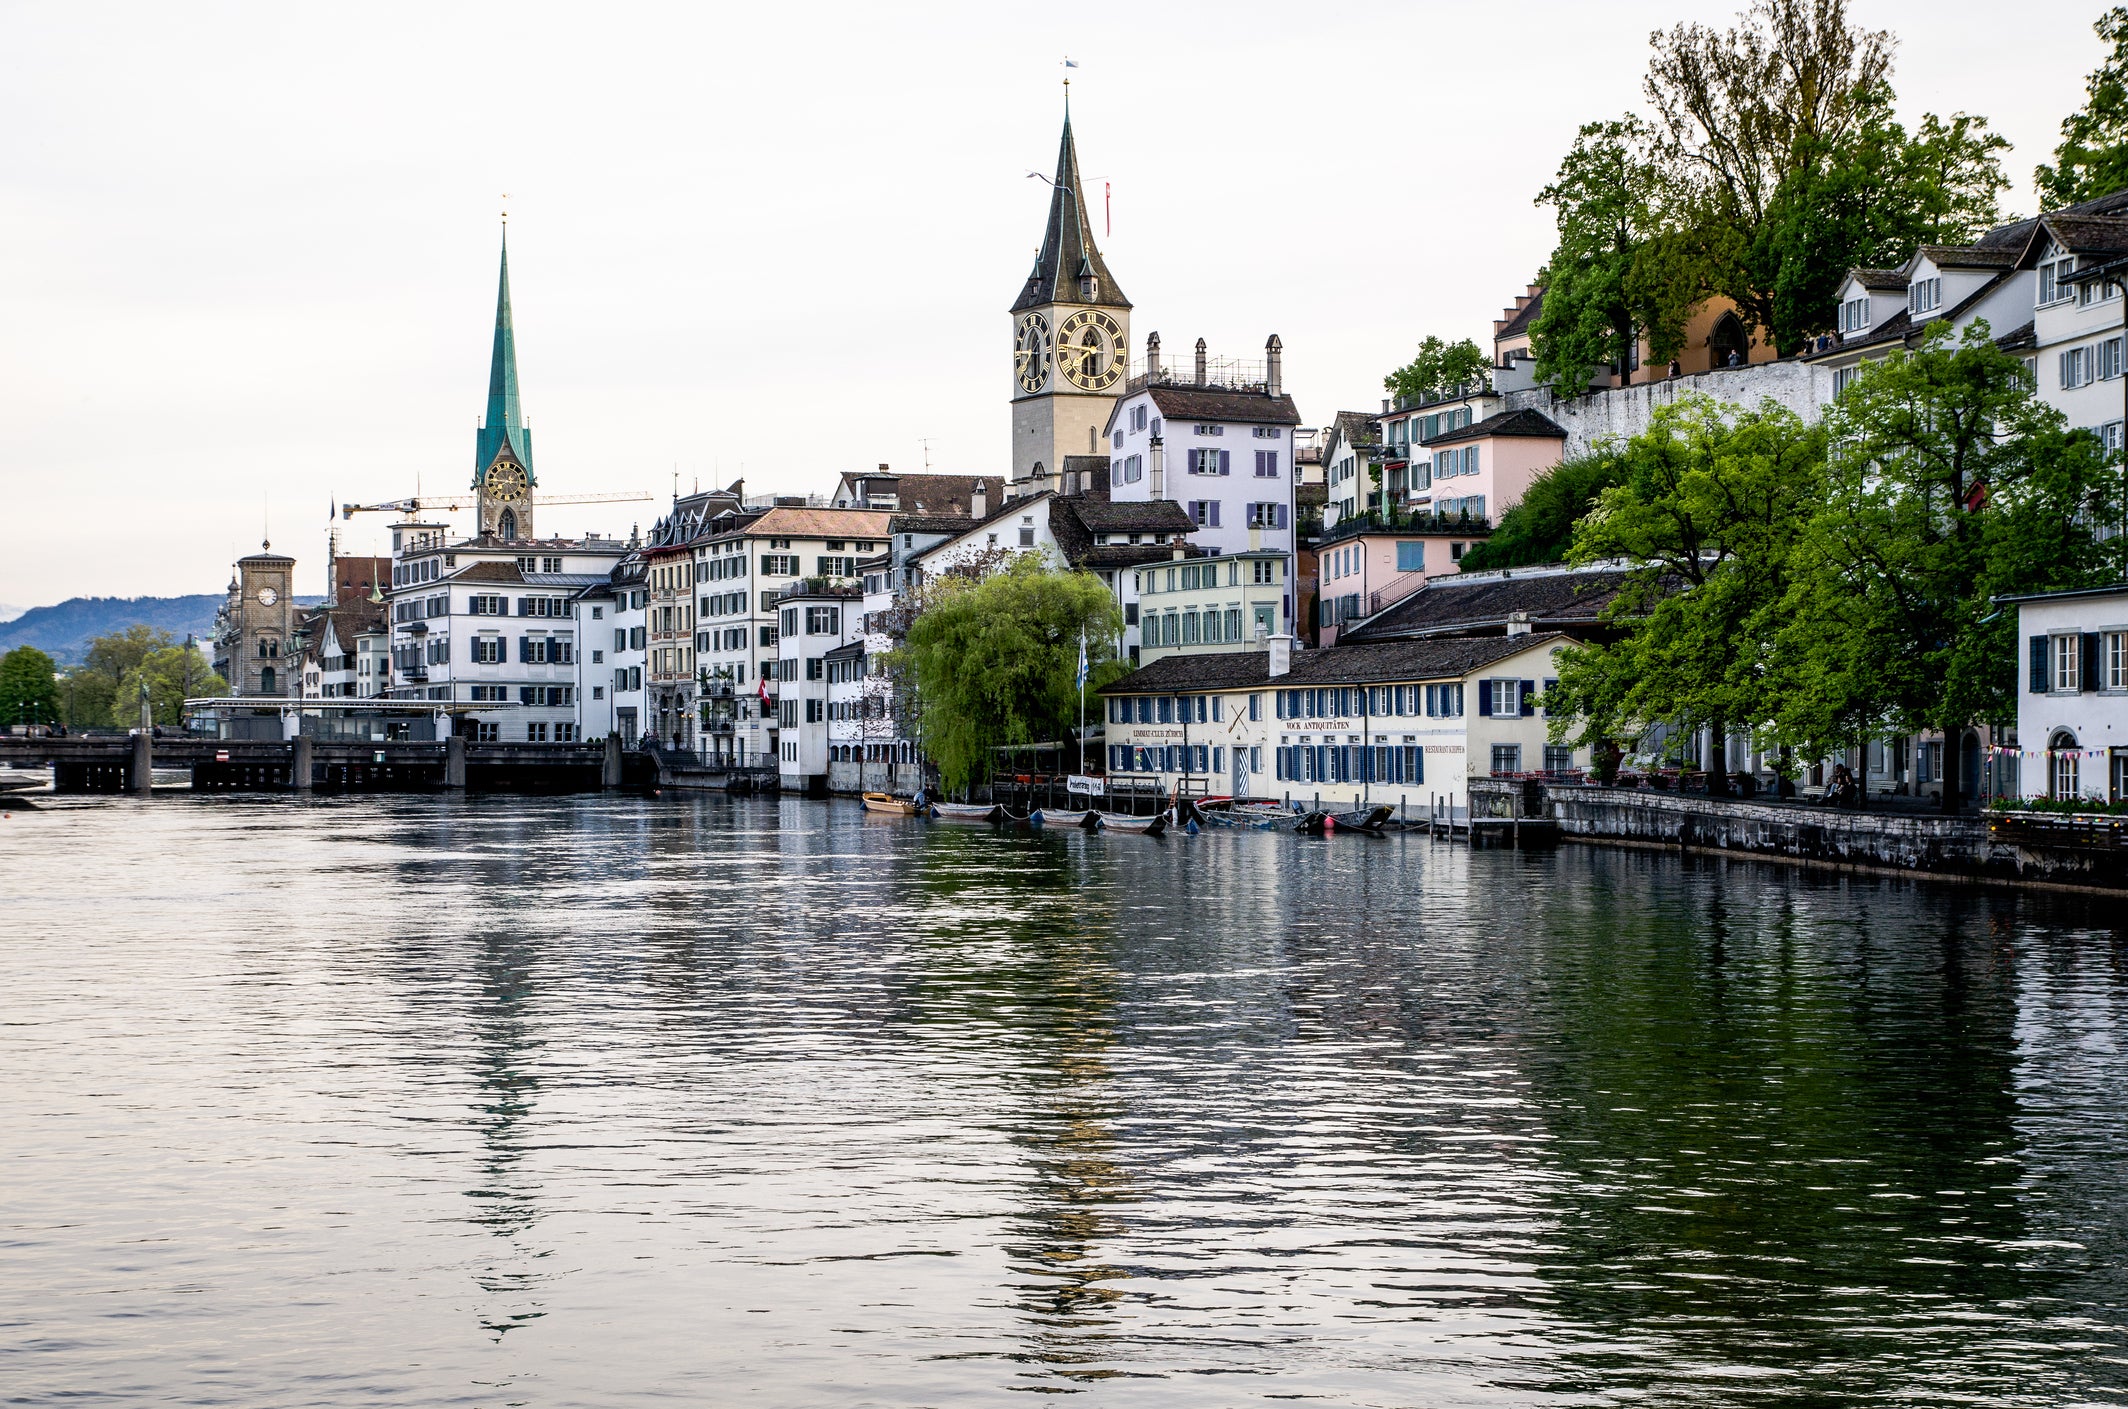 Churches And Buildings By Limmat River In City Against Clear Sky